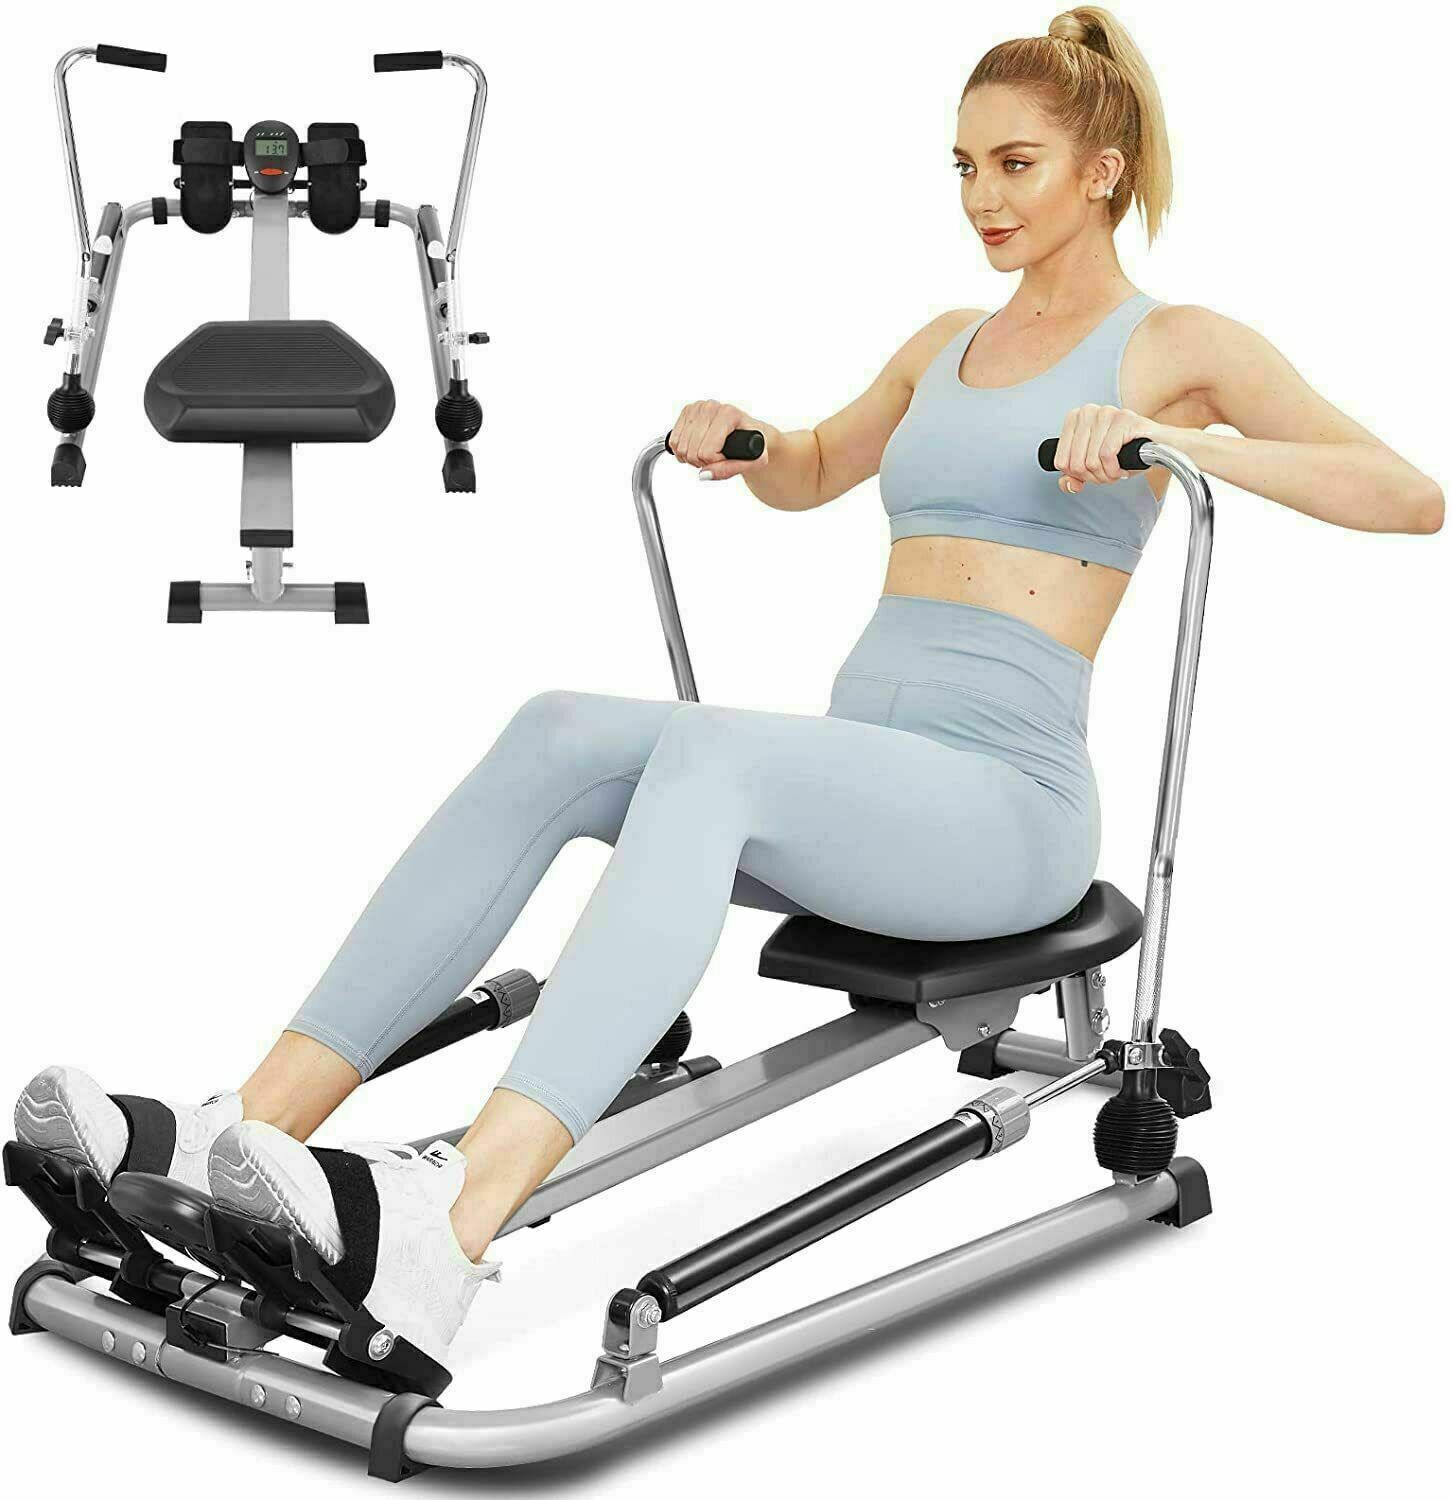 12 Levels Magnetic Row Rowing Machine Rower Cardio Home Gym Exercise Equipment.